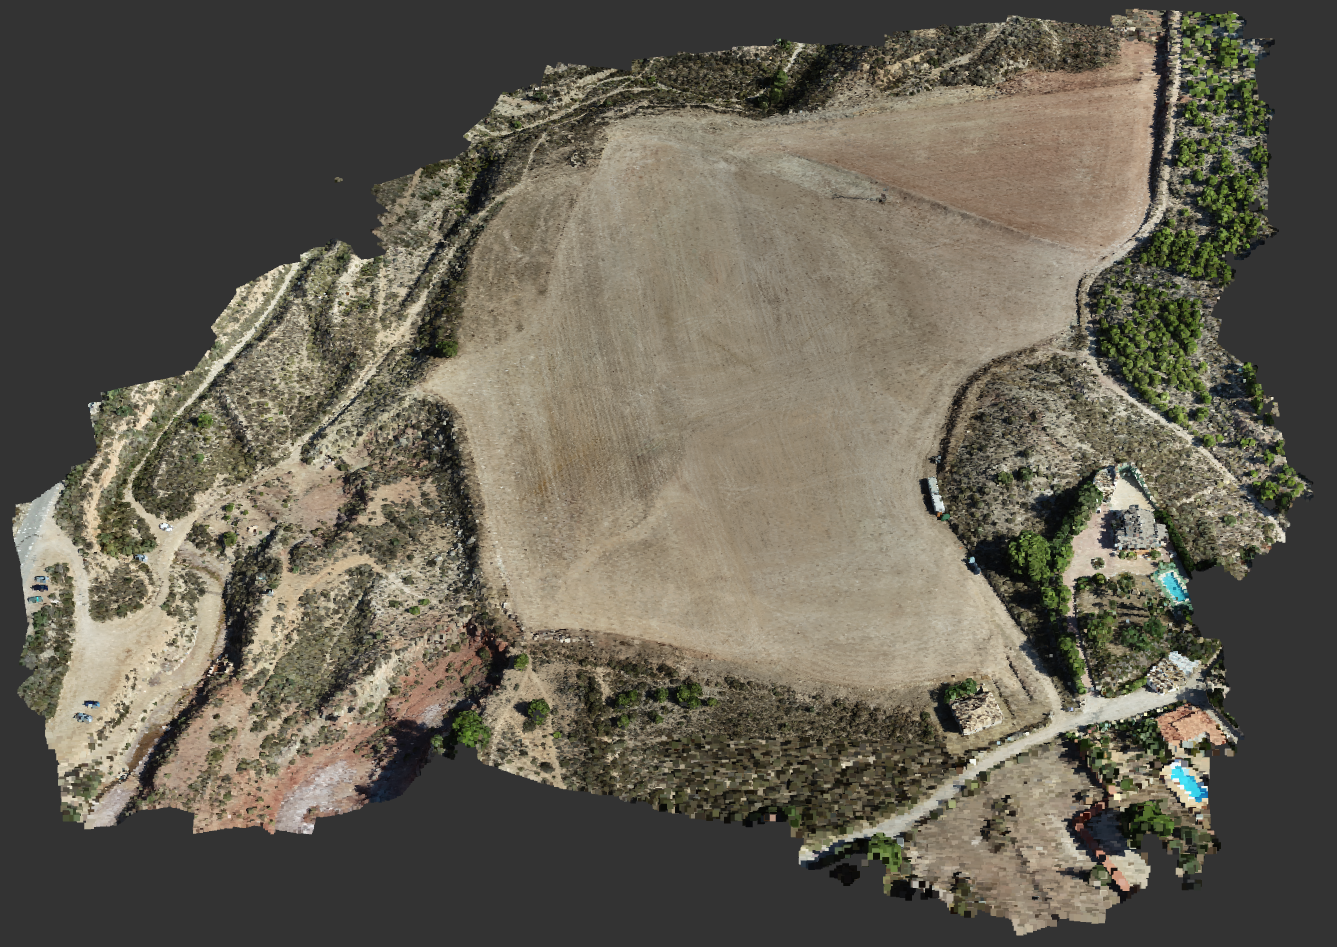 LiDAR point cloud colored by Sitemark